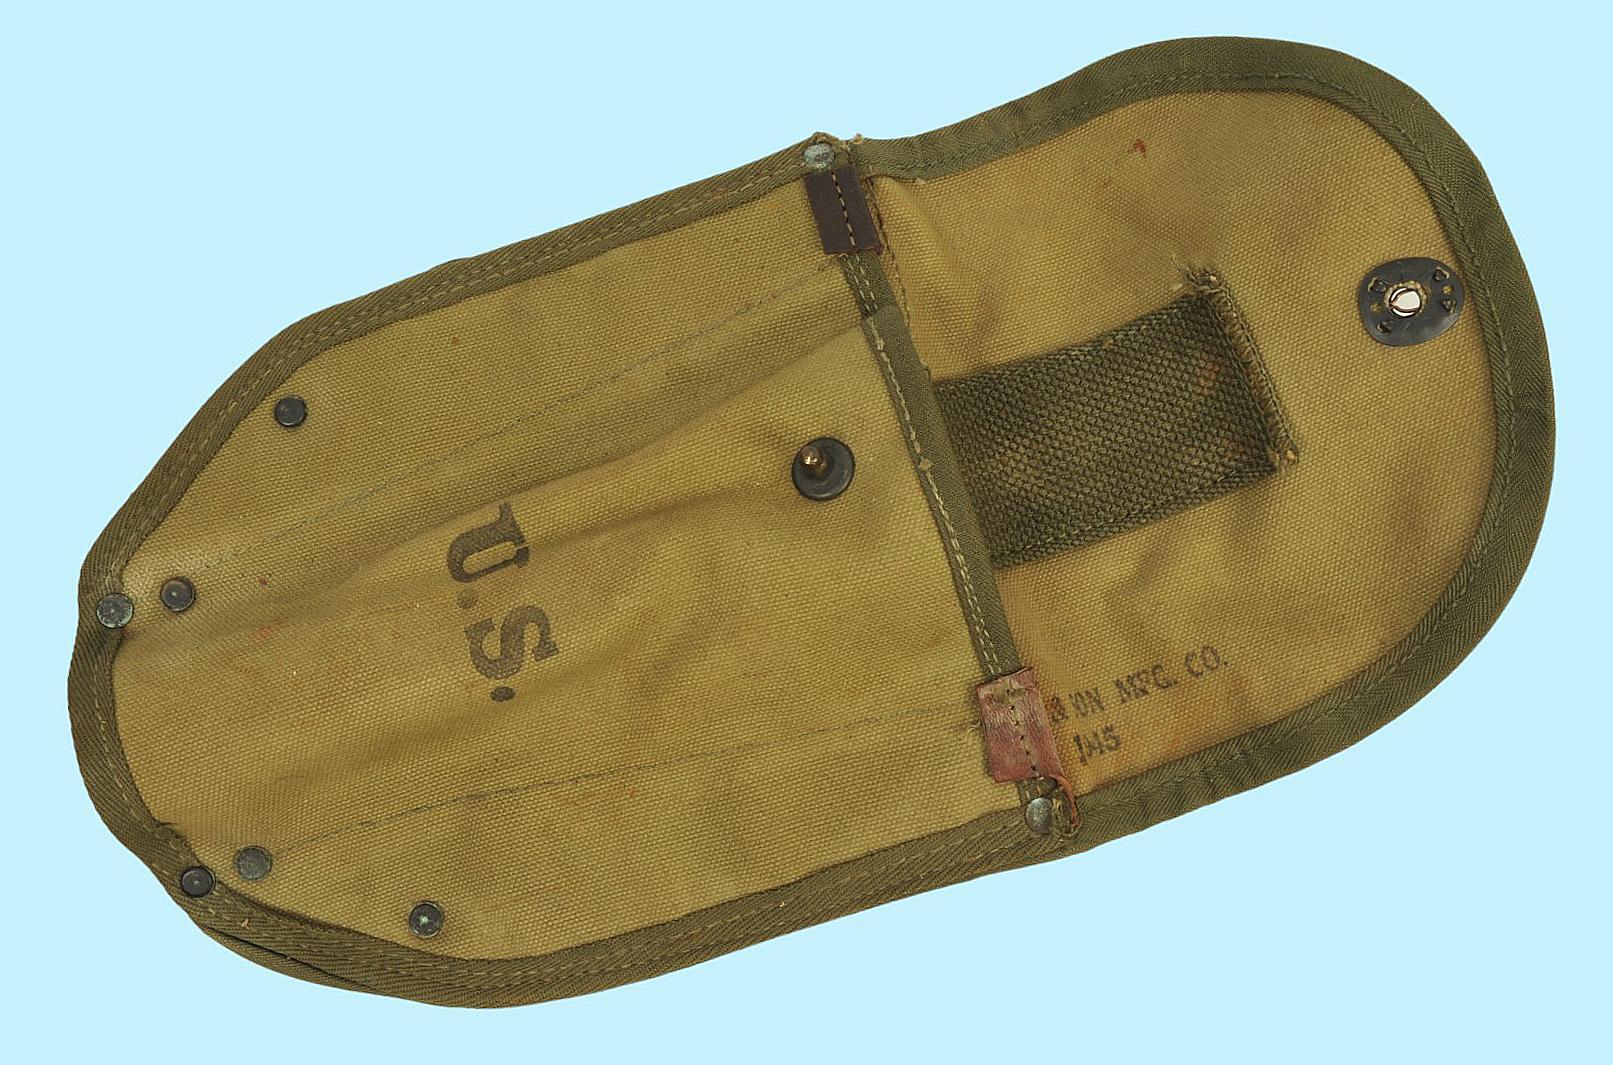 US Military WWII Entrenching Tool/Shovel (A)